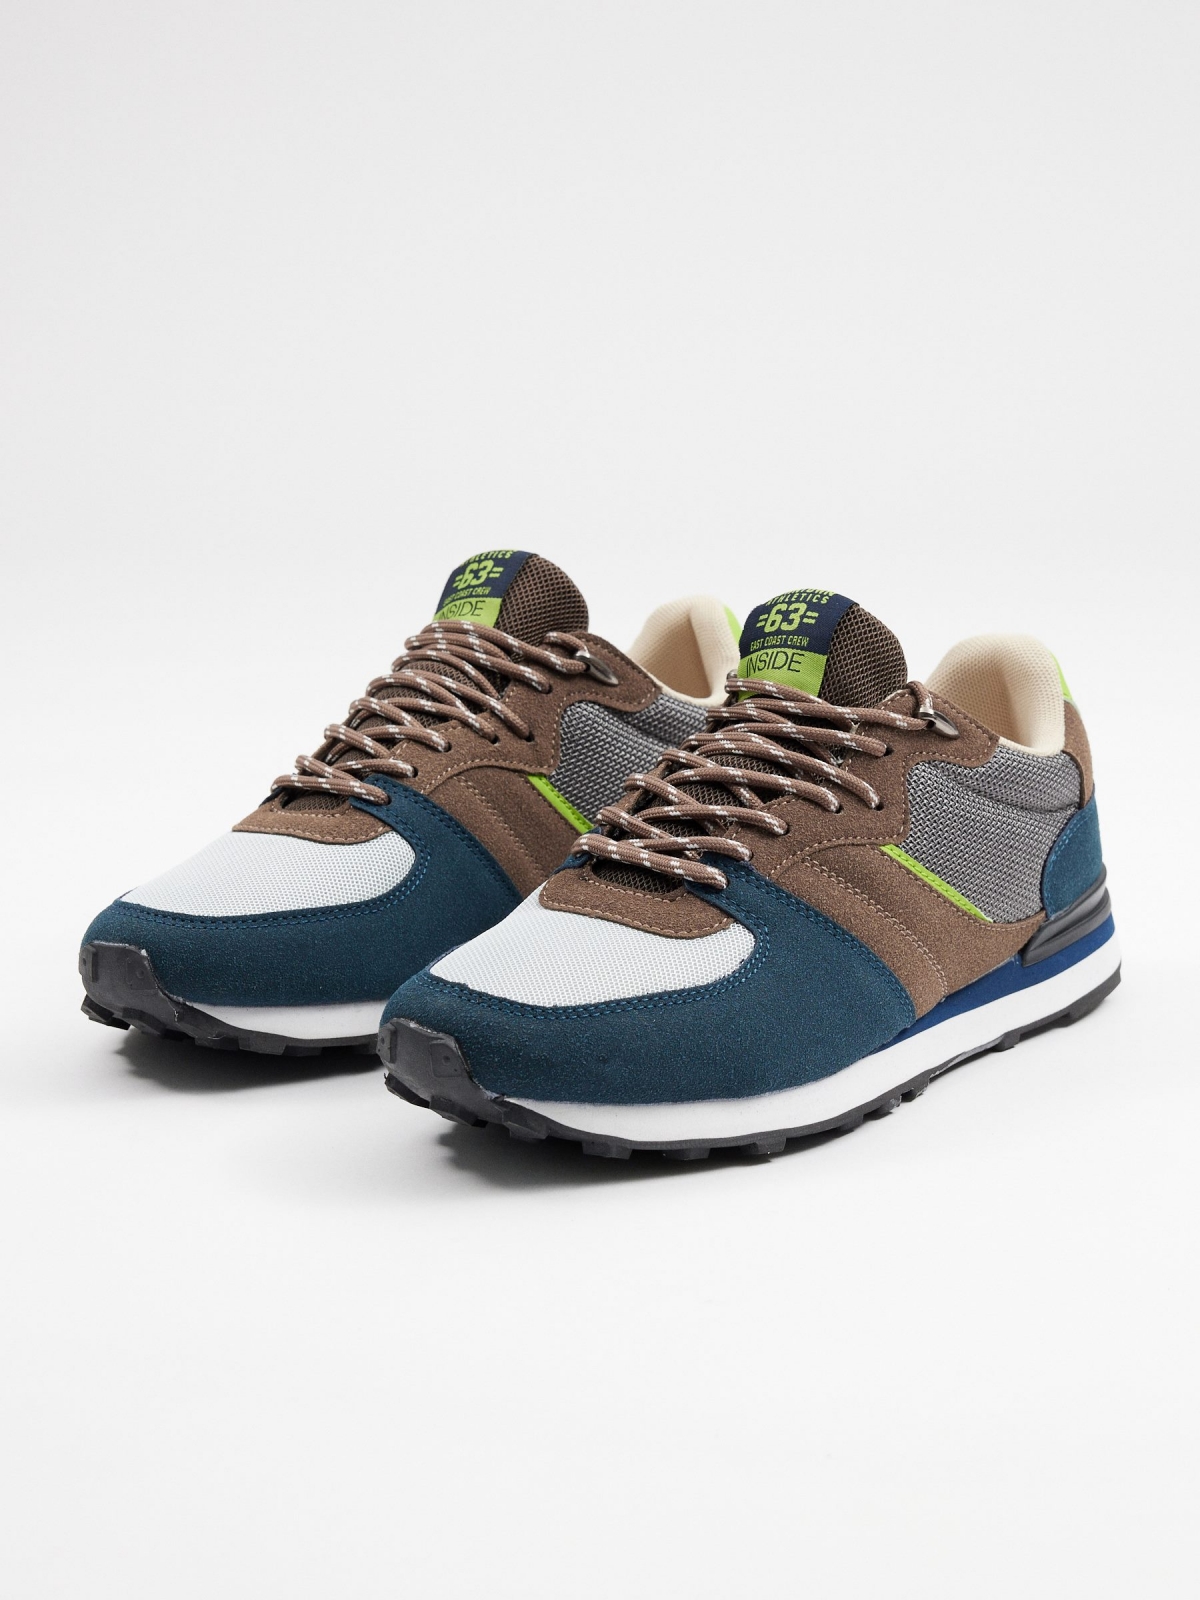 Brown casual sneaker petrol blue 45º front view